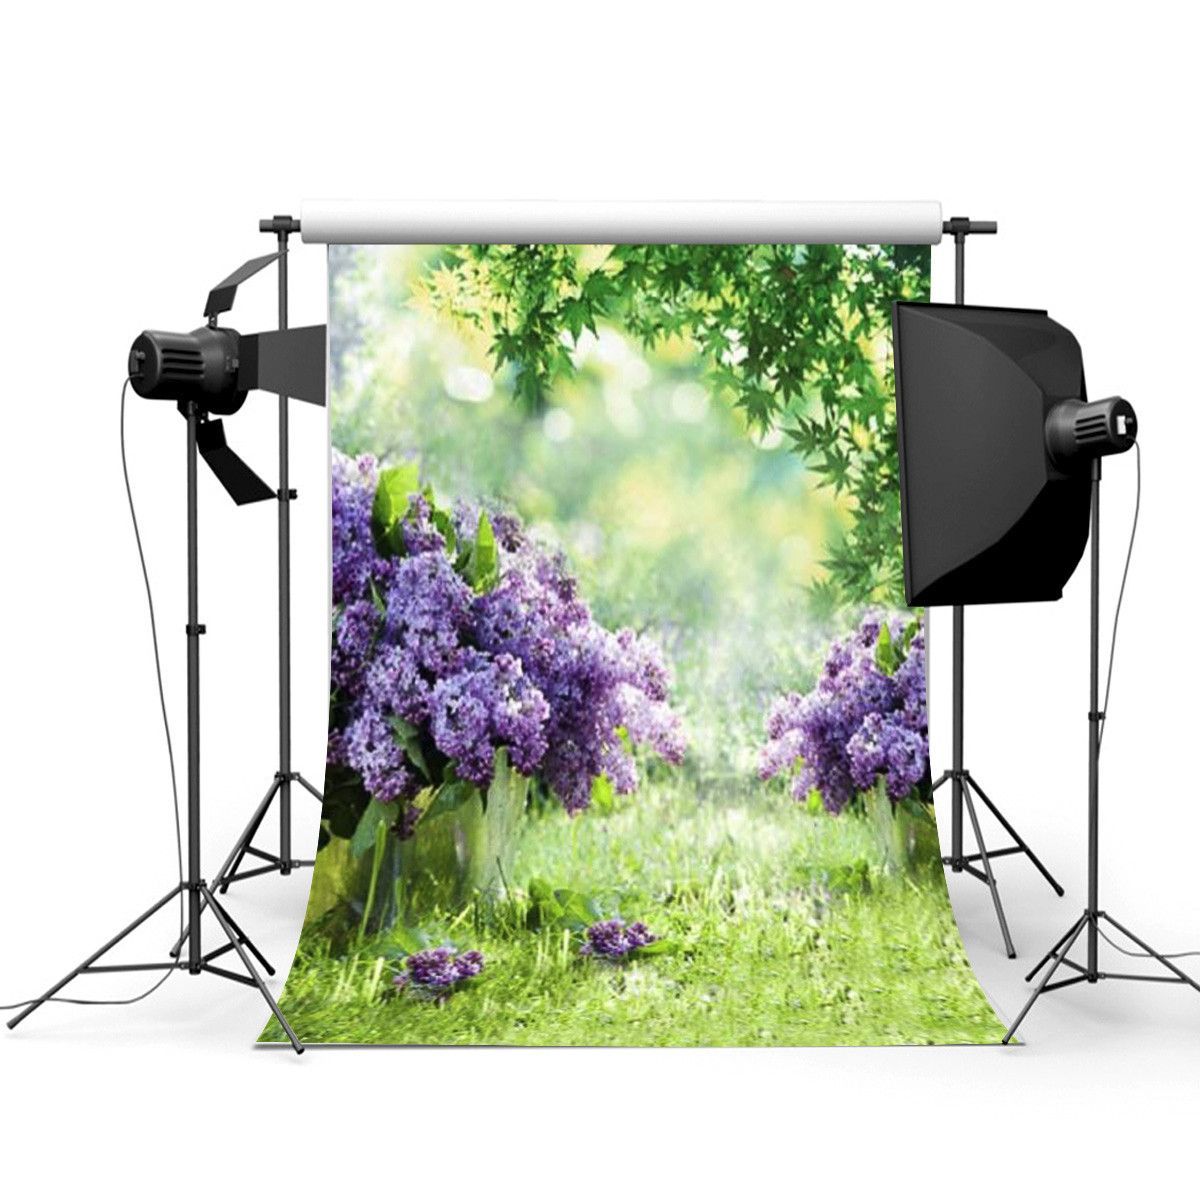 Spring-Outdoor-Green-Grass-Photography-Background-Backdrop-For-Studio-3x5ft-1130361